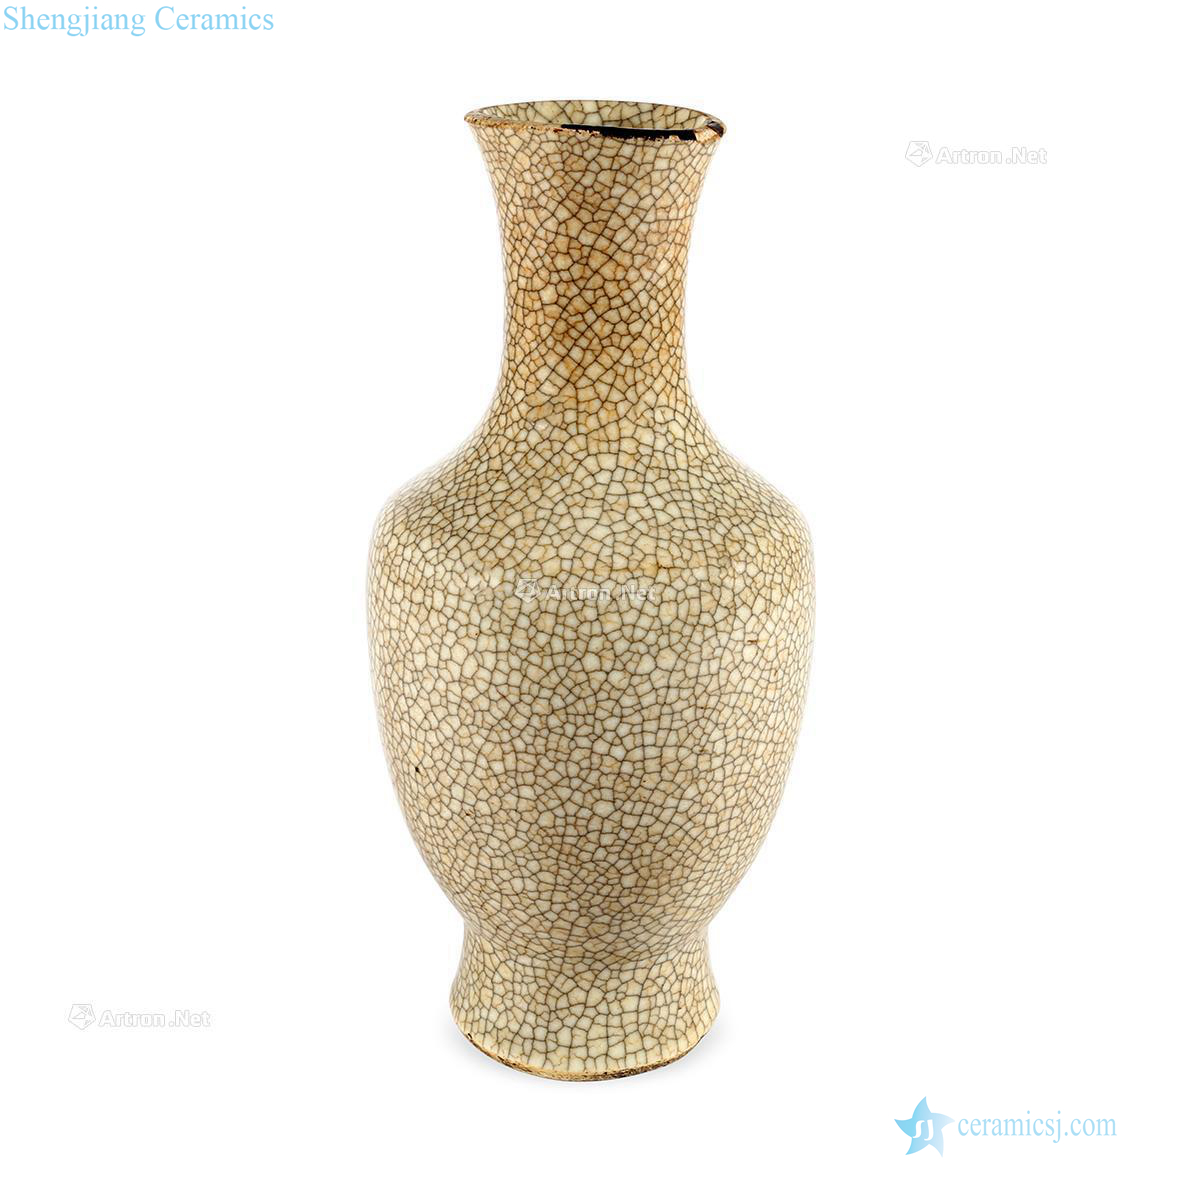 Brother song dynasty kiln mouth bottle